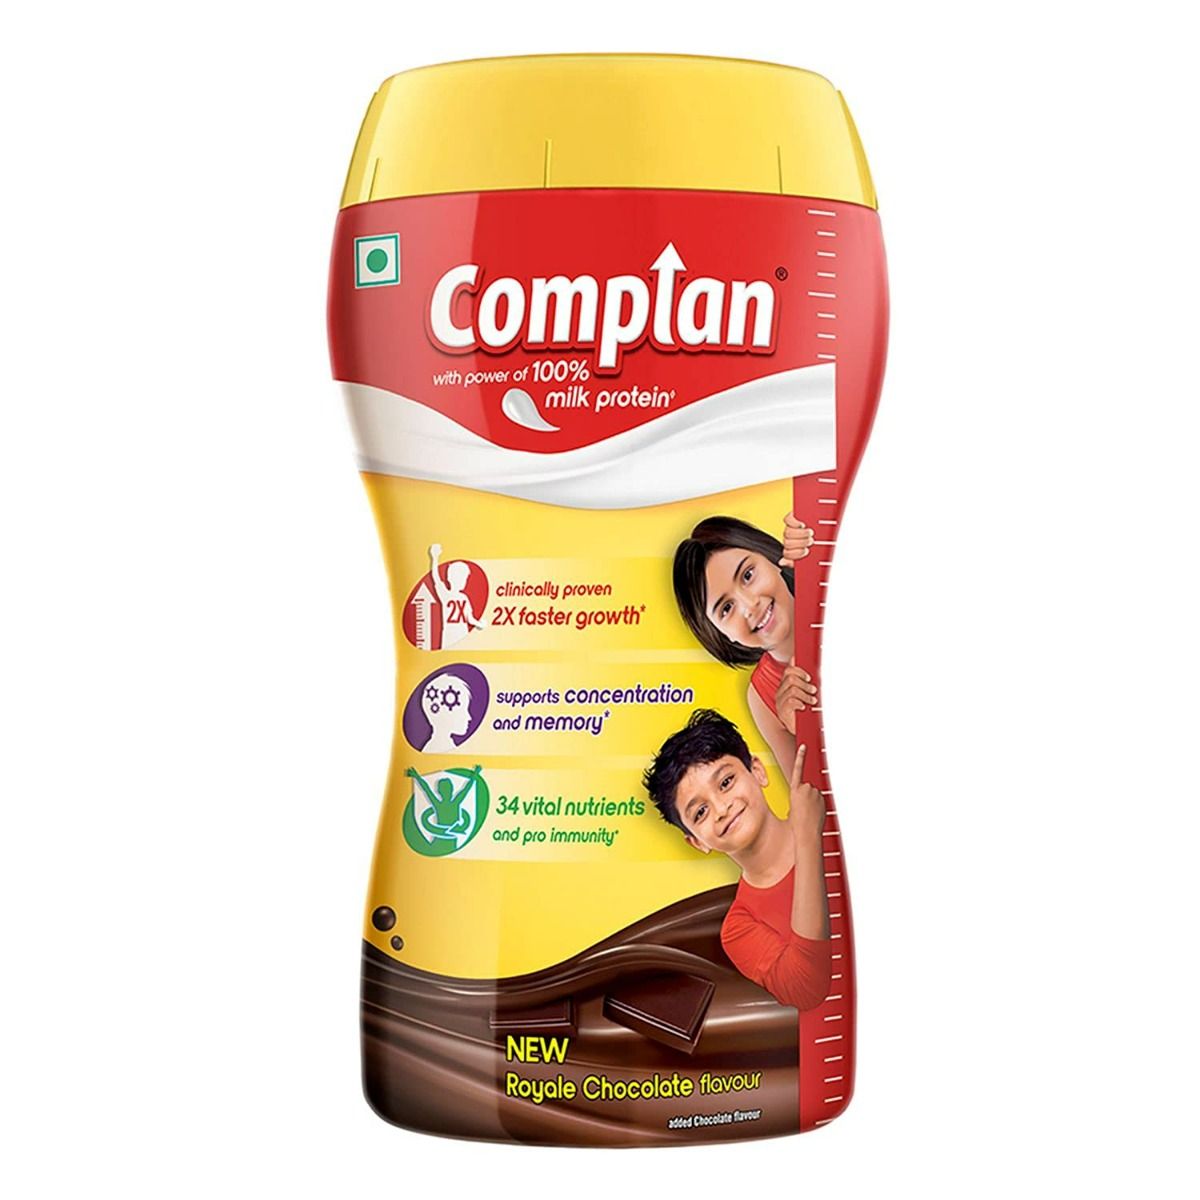 Complan Royale Chocolate Flavour Health And Nutrition Drink Powder 200